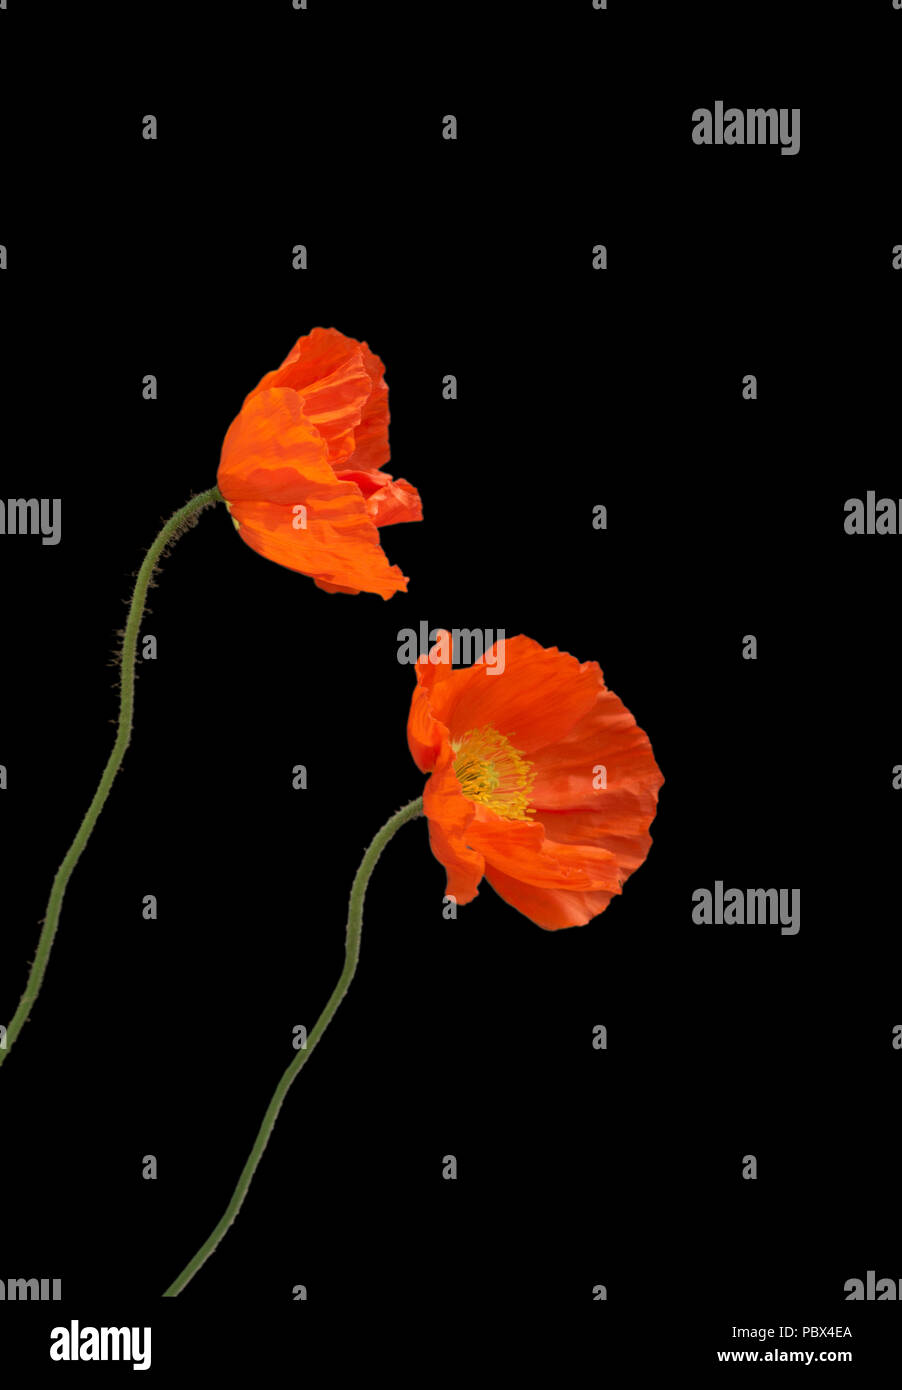 Red poppies against black background. Stock Photo